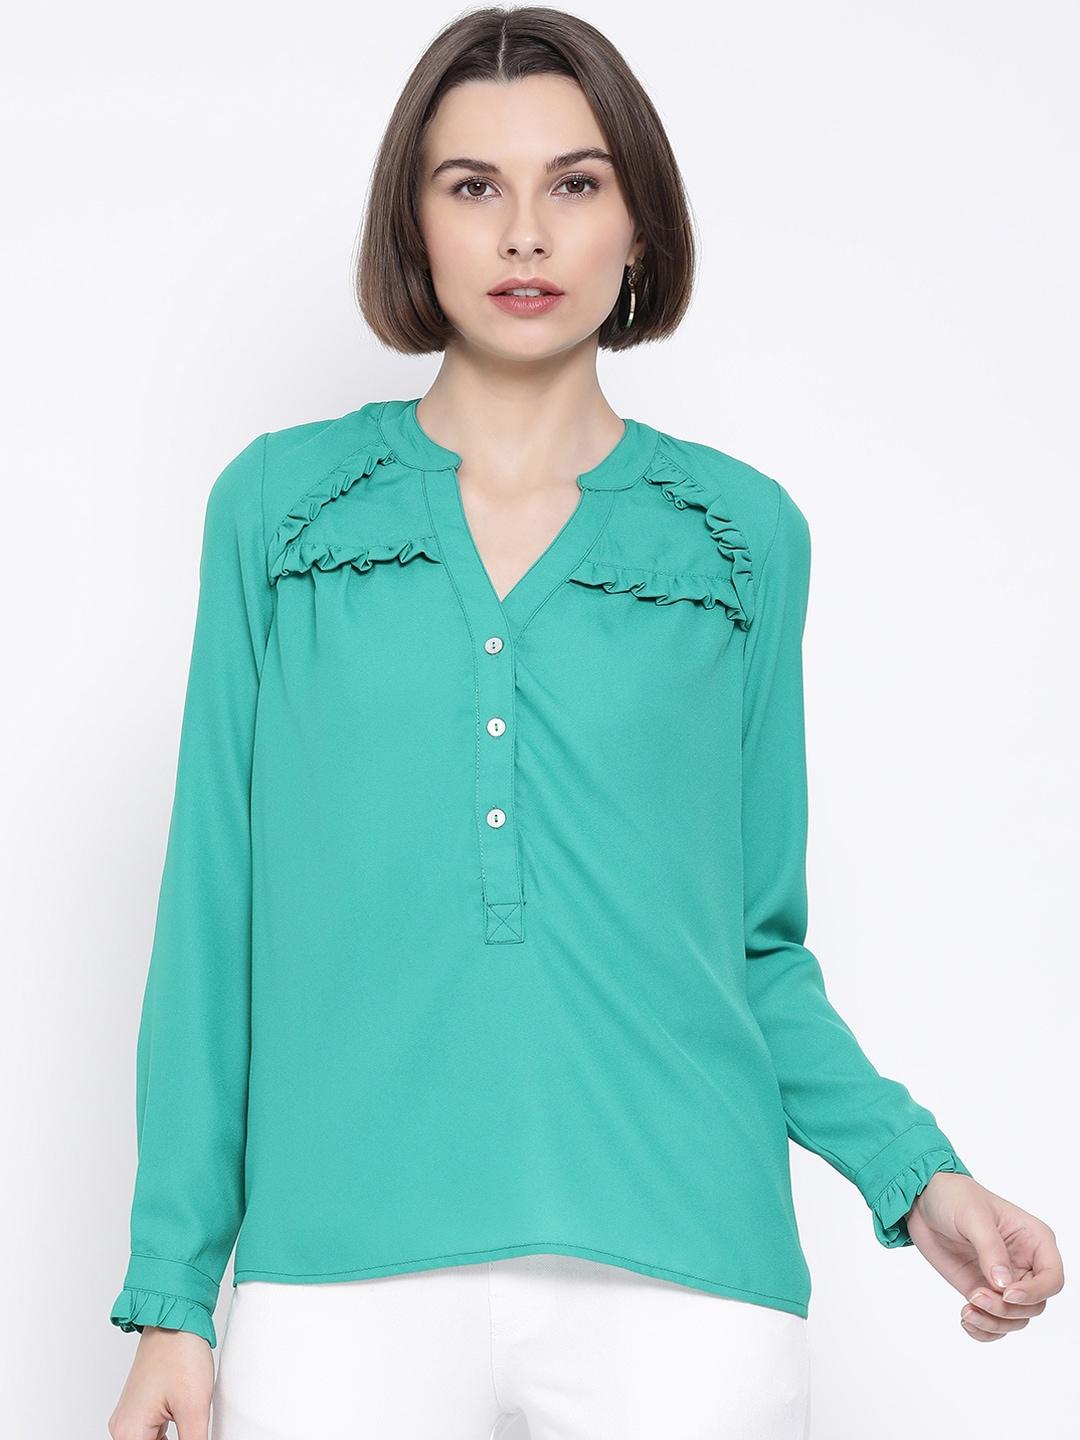 oxolloxo women green solid shirt style top